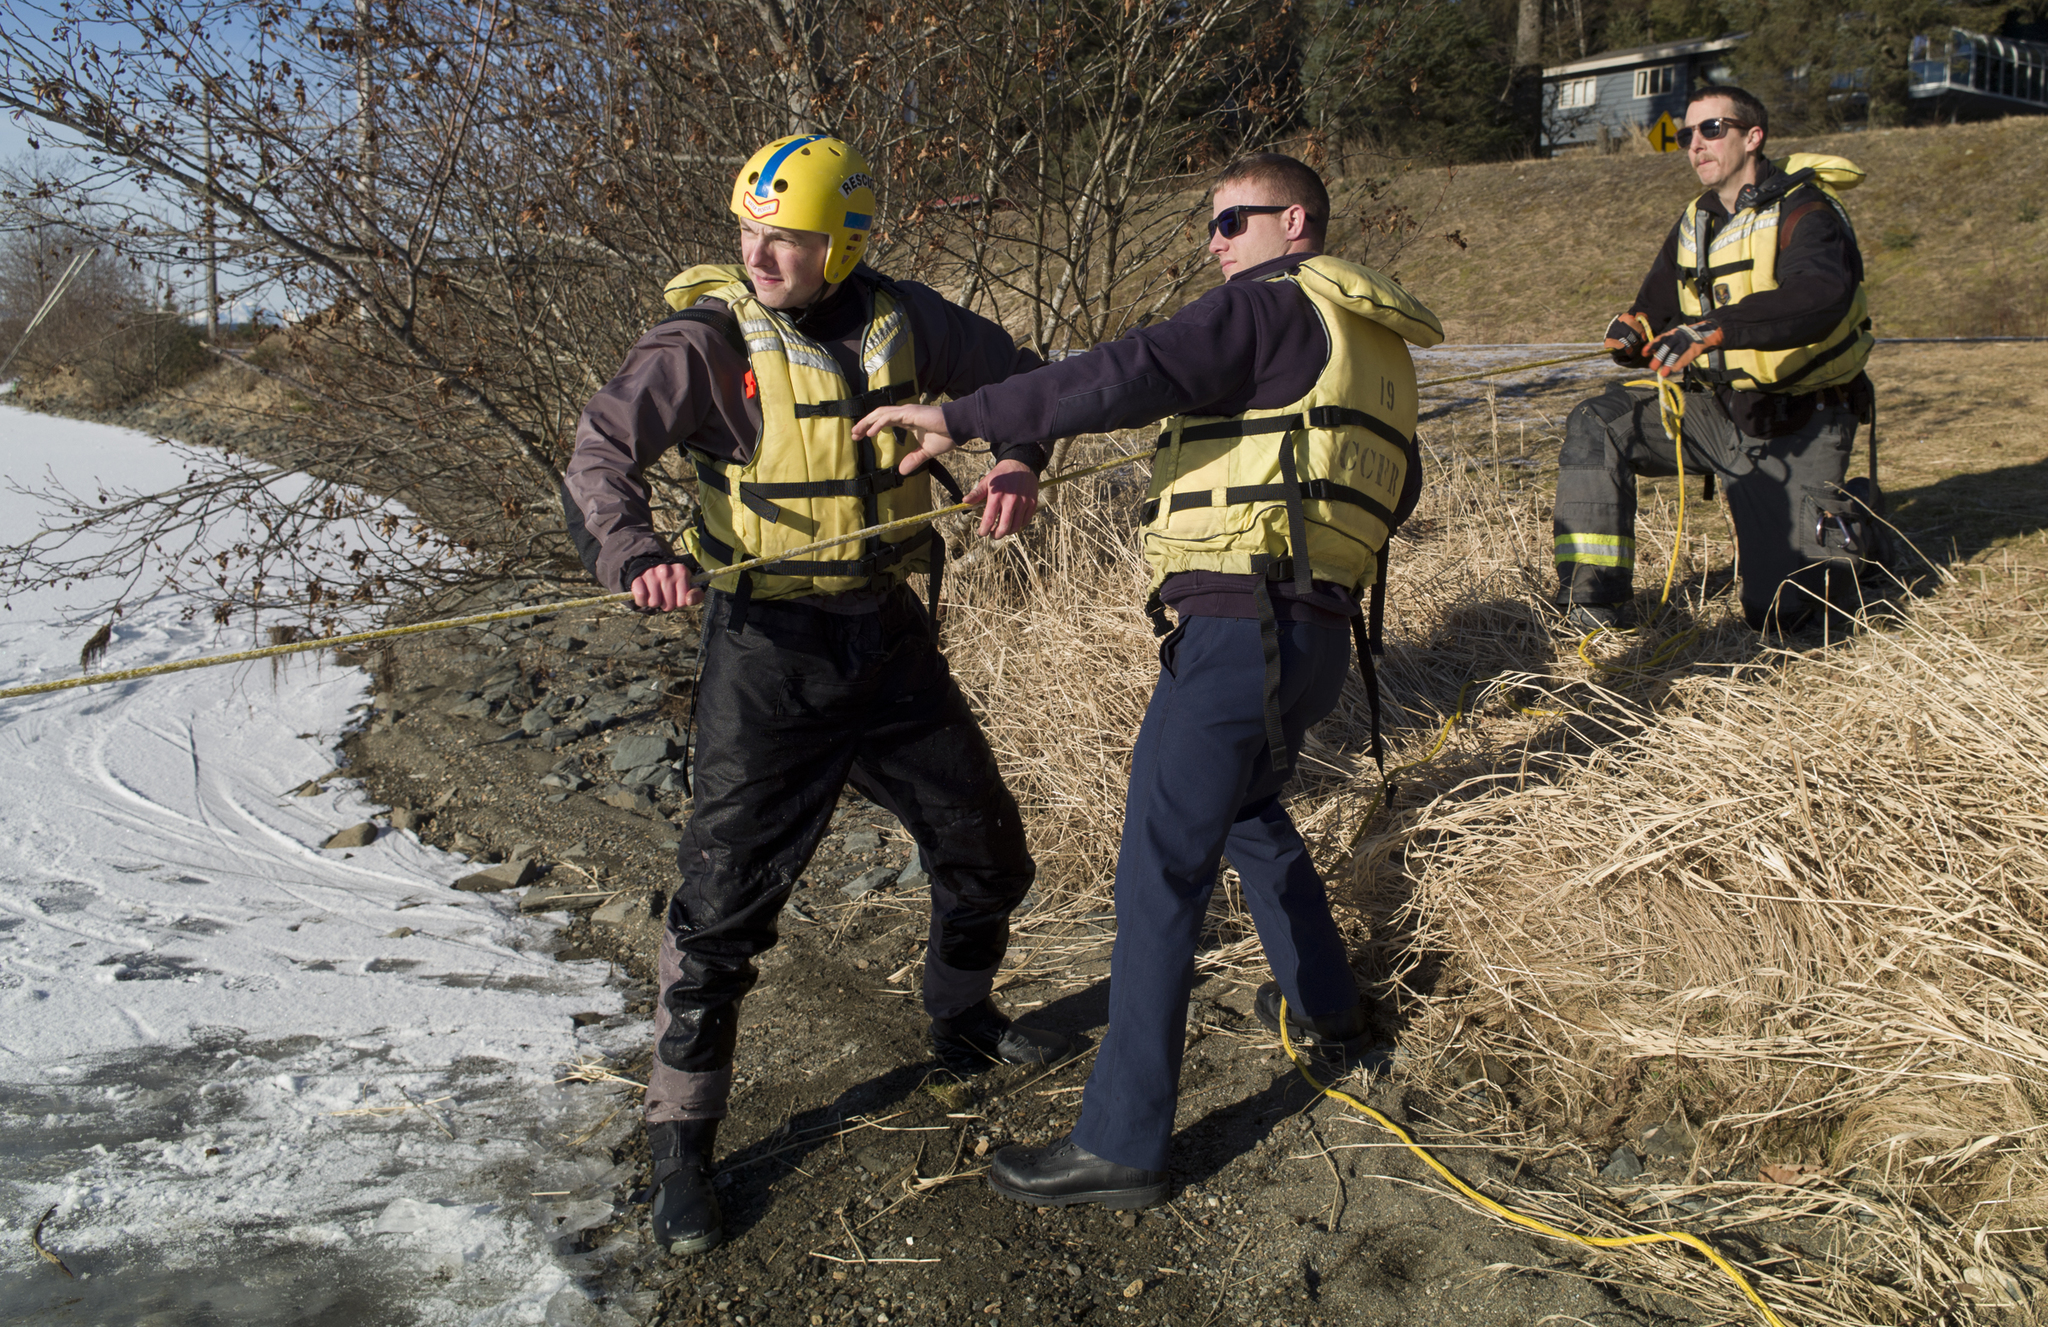 Capital City Fire/Rescue firefighter Capt. Noah Jenkins, right, firefighter Andrew Bishop, center, and volunteer firefighter Chad Gustafson participate during an ice rescue training at Twin Lakes on Thursday. (Michael Penn | Juneau Empire)